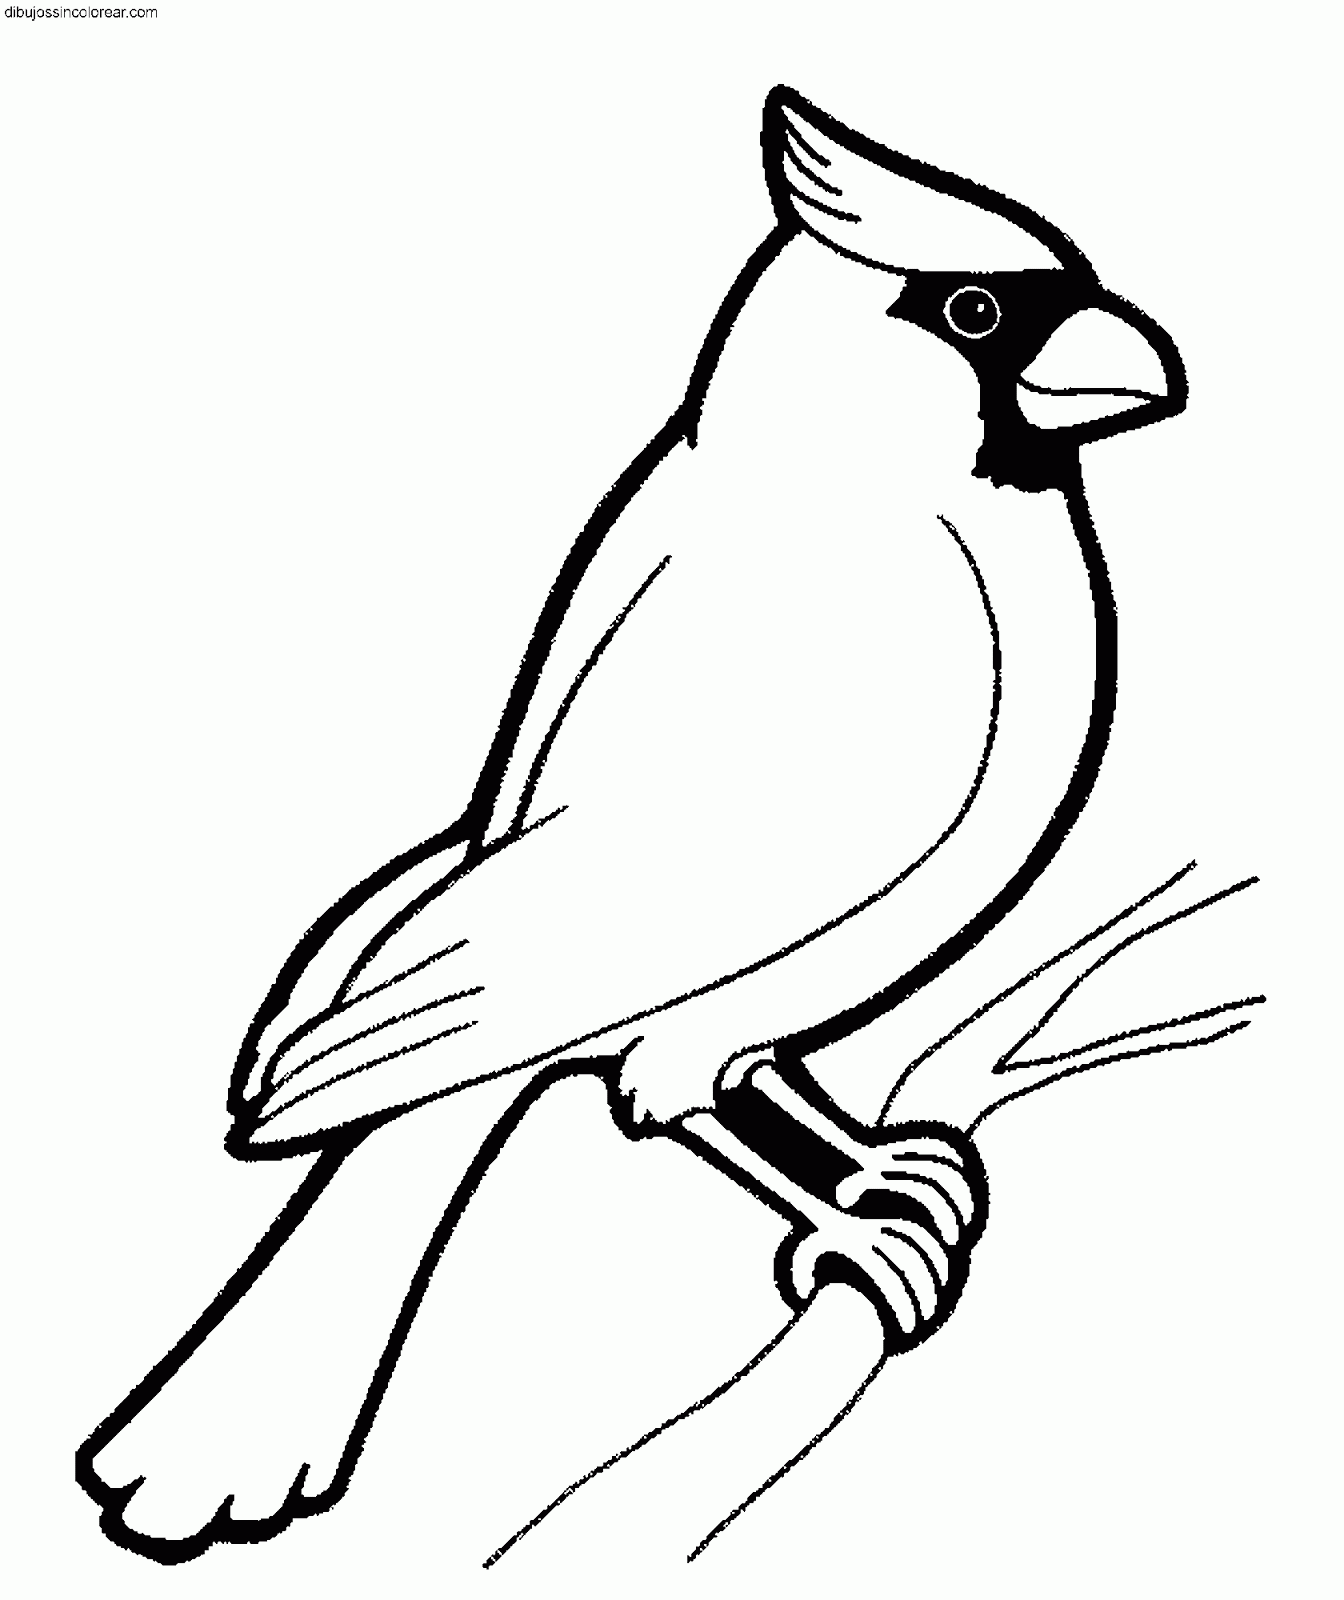 ohio state bird coloring pages - photo #29